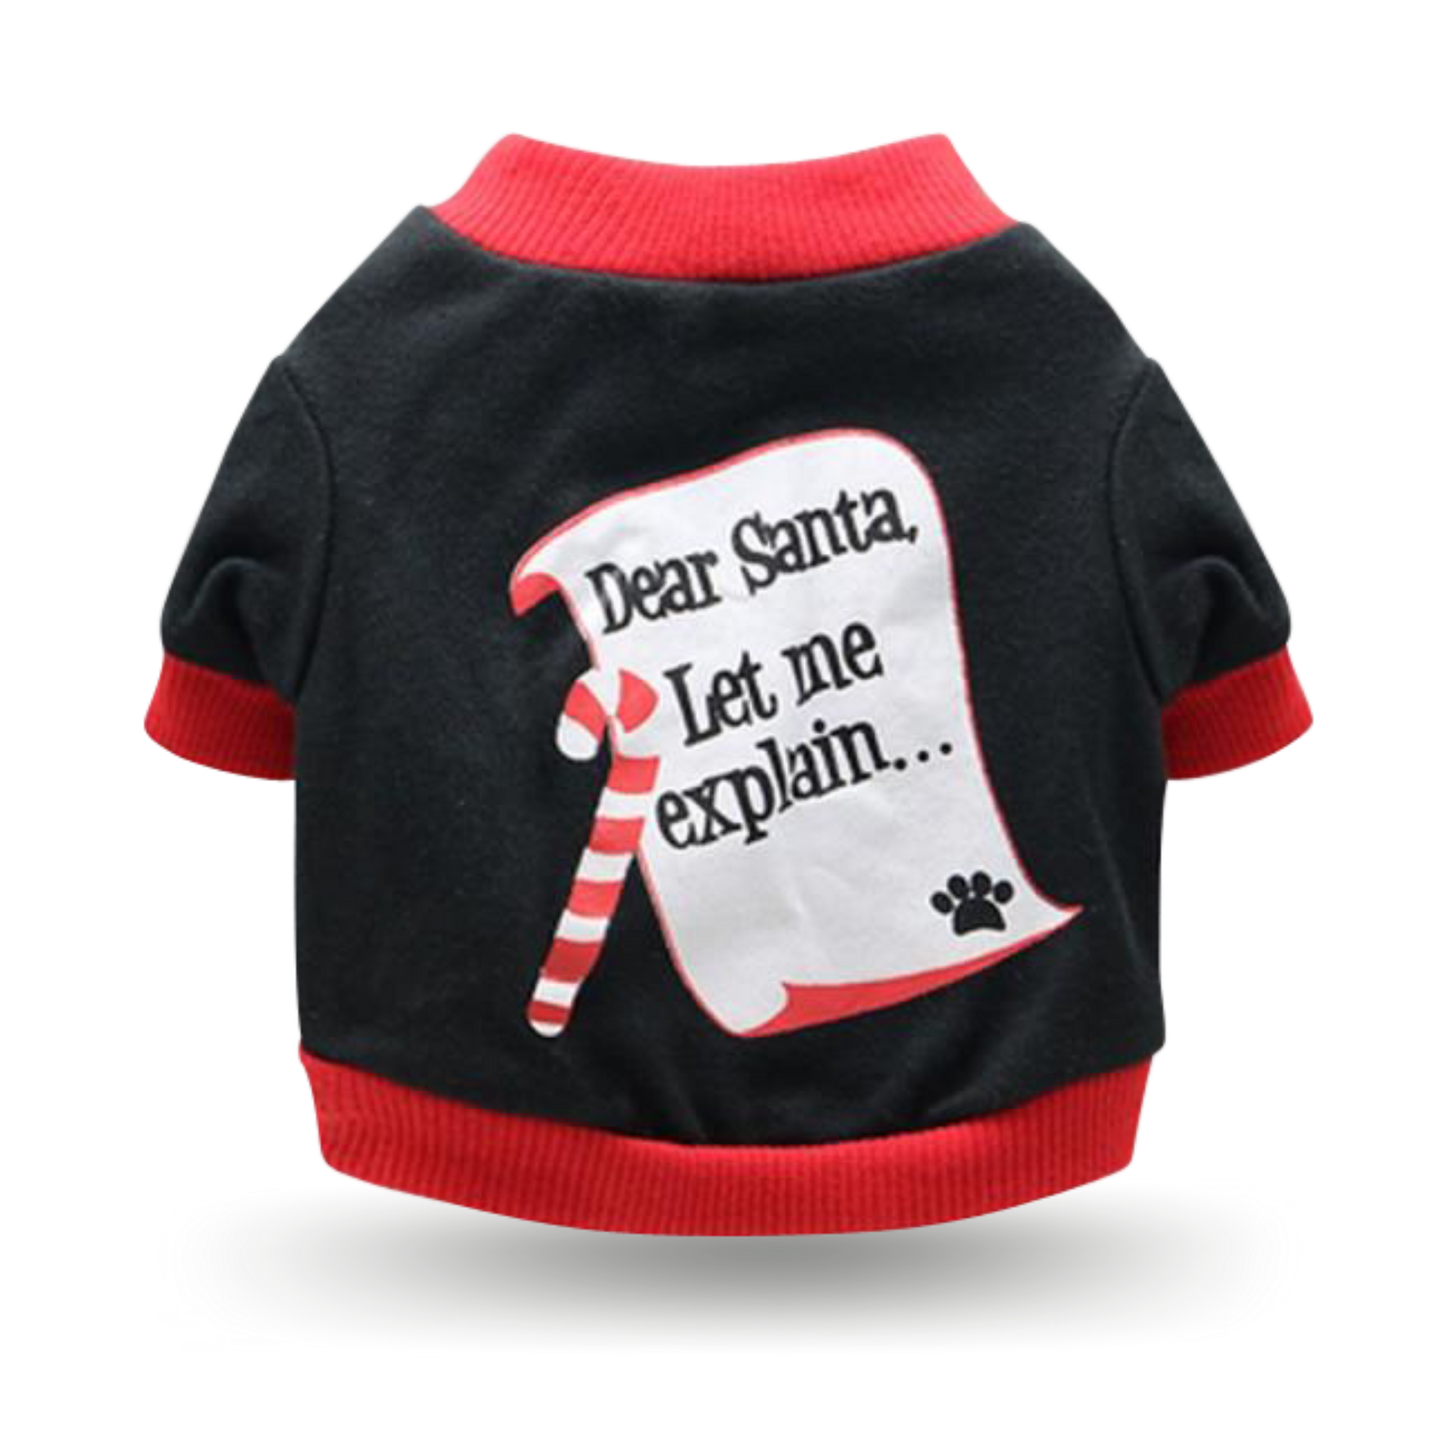 Soft cotton black t-shirt with ribbing collar, arm and waist bands with "Dear Santa, Let me explain ..." screen printed motif